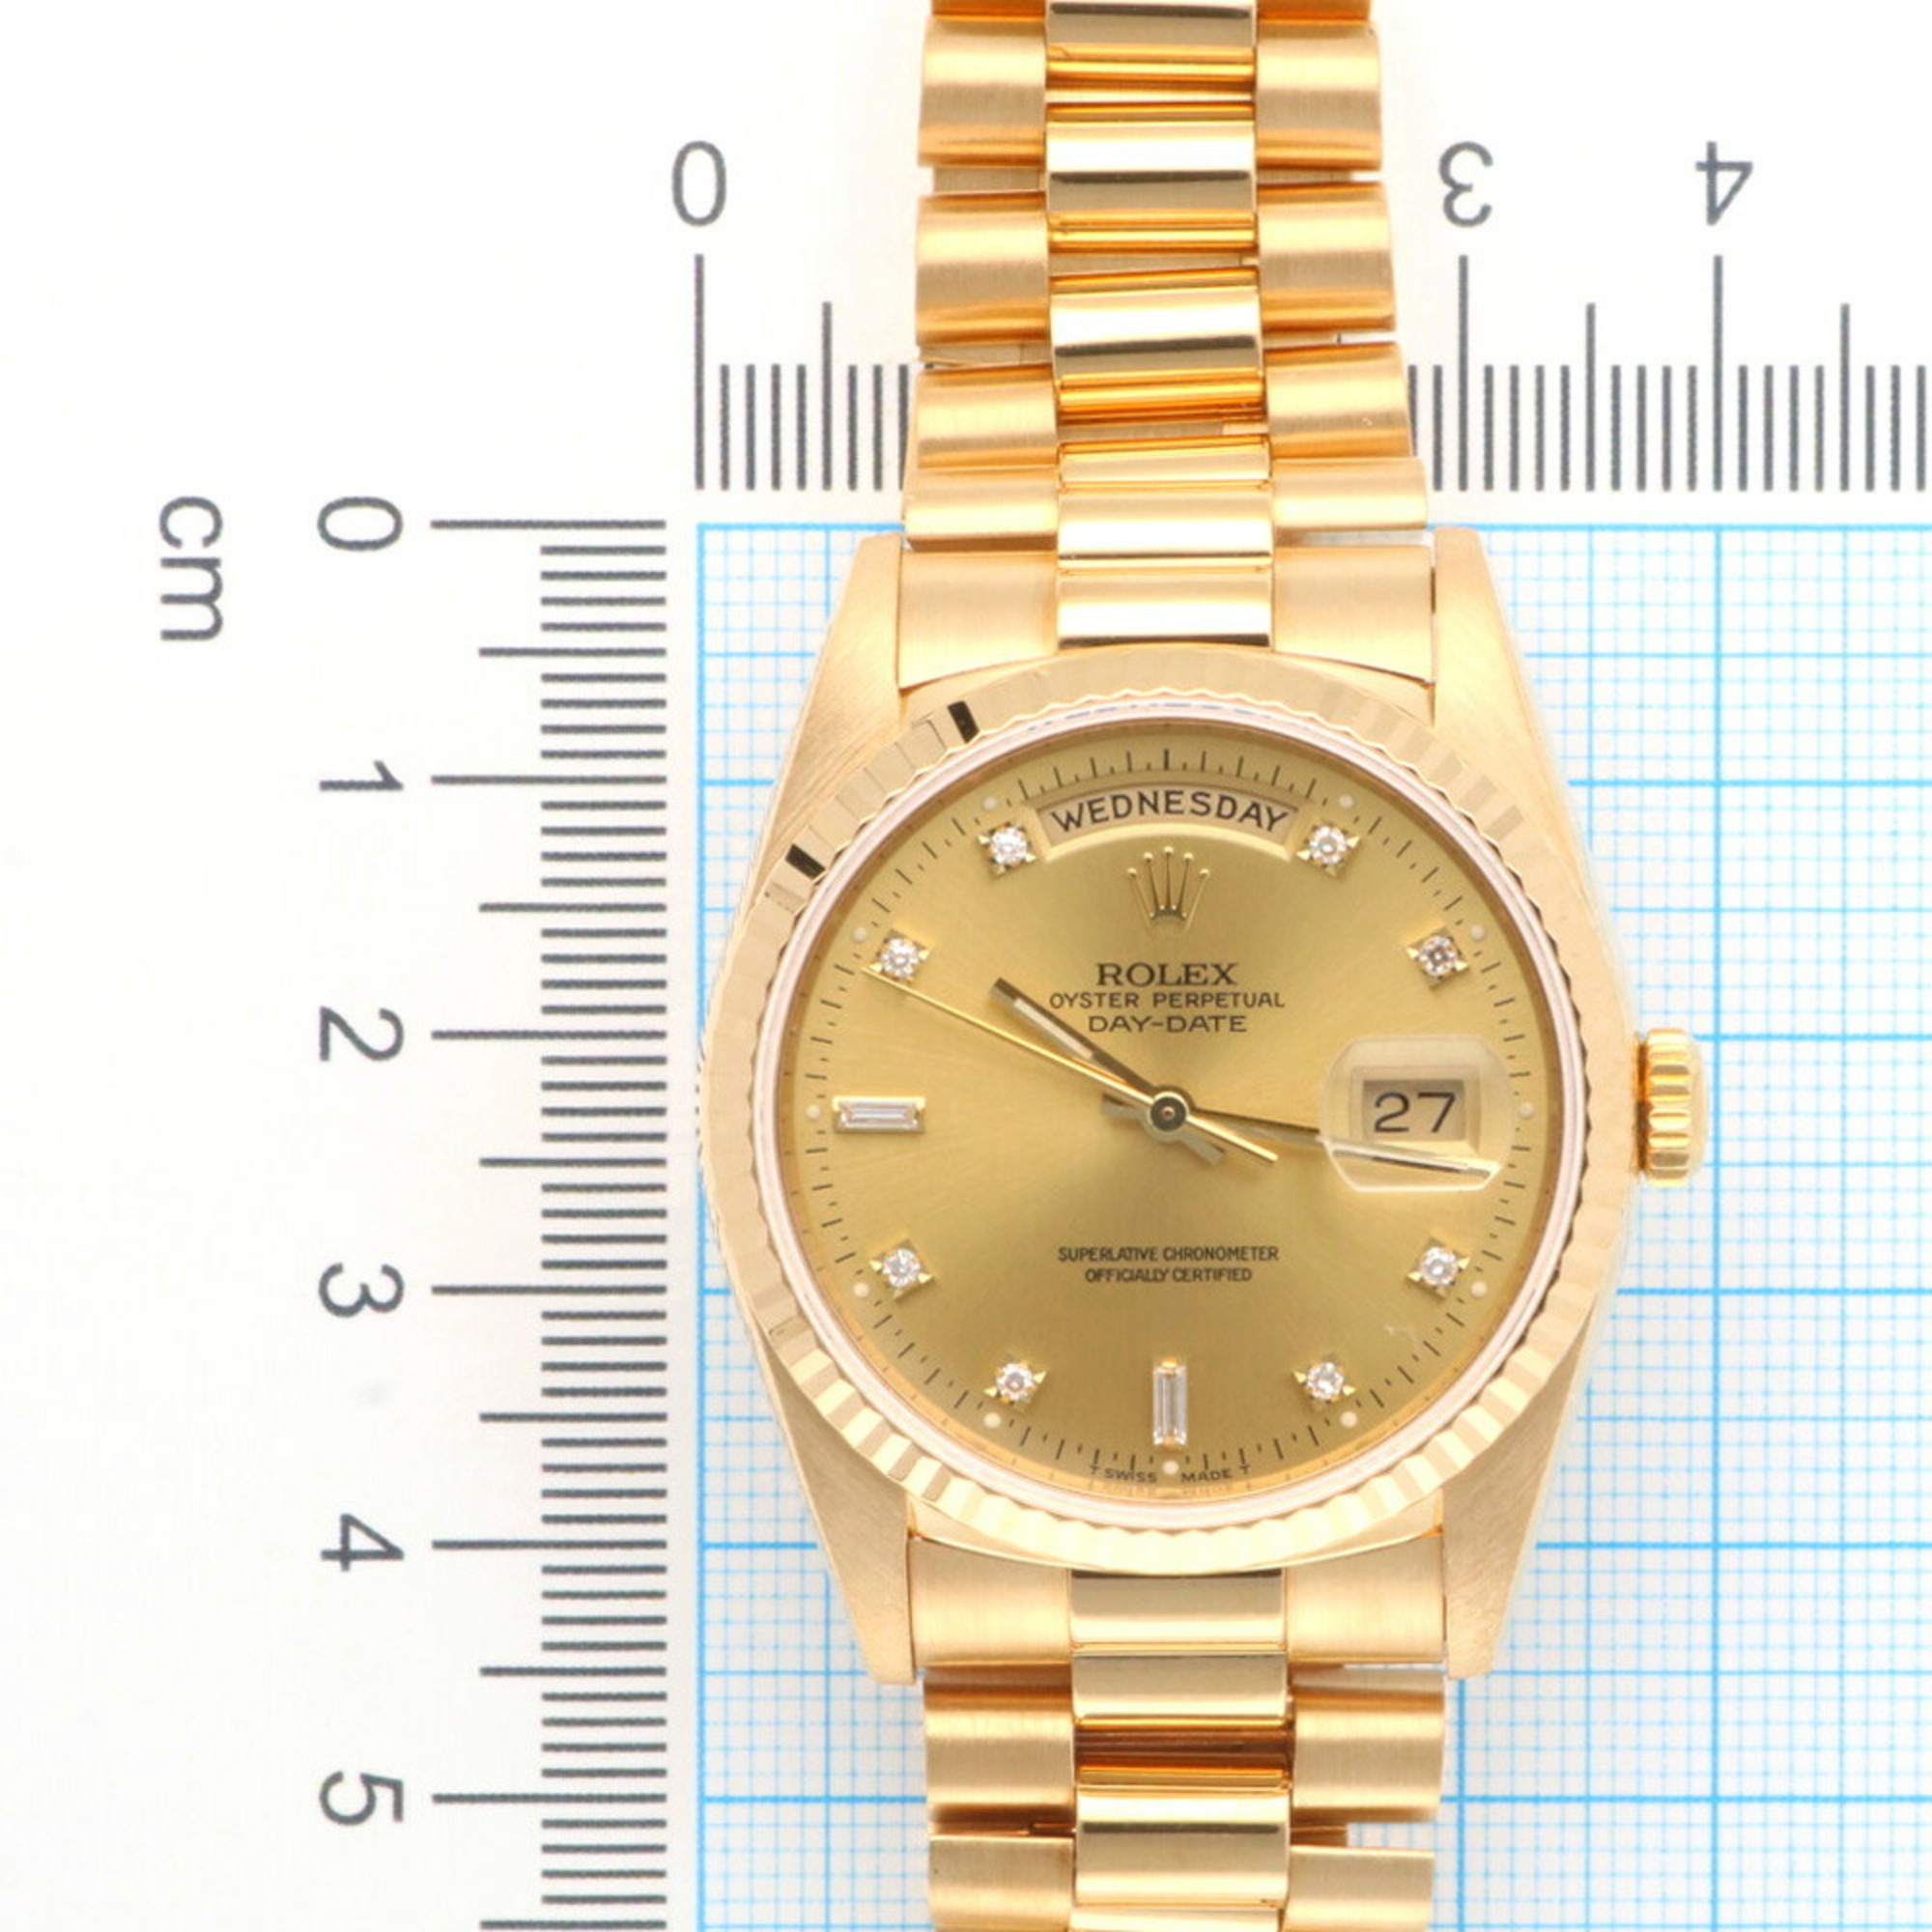 Rolex Day-Date Oyster Perpetual Watch 18K 18238 Automatic Men's L Series 1989-1990 Model Overhauled Index Diamond